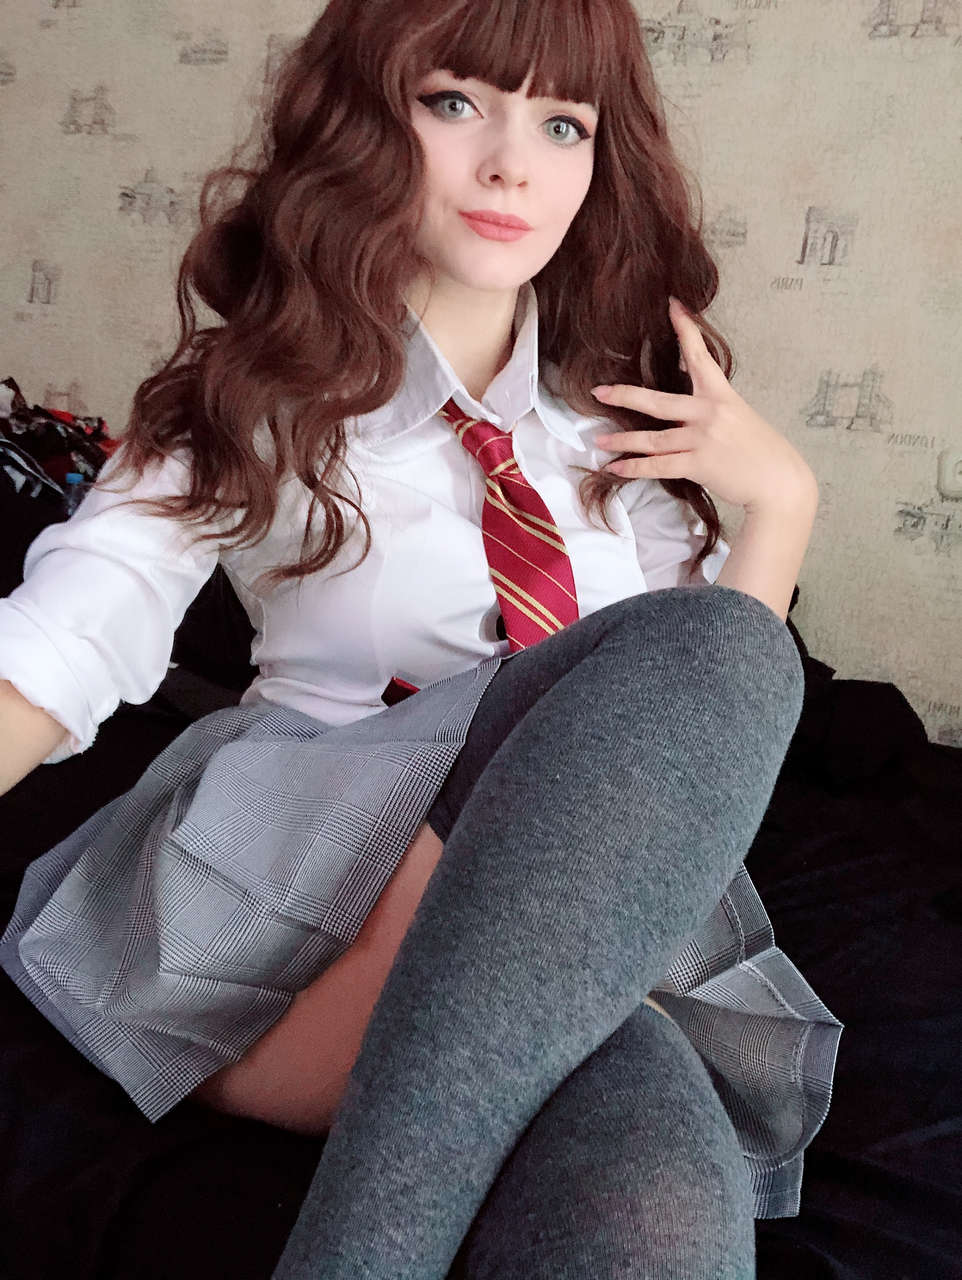 Making Some Selfies Before My Lessons Hermione Granger By Evenink Cospla